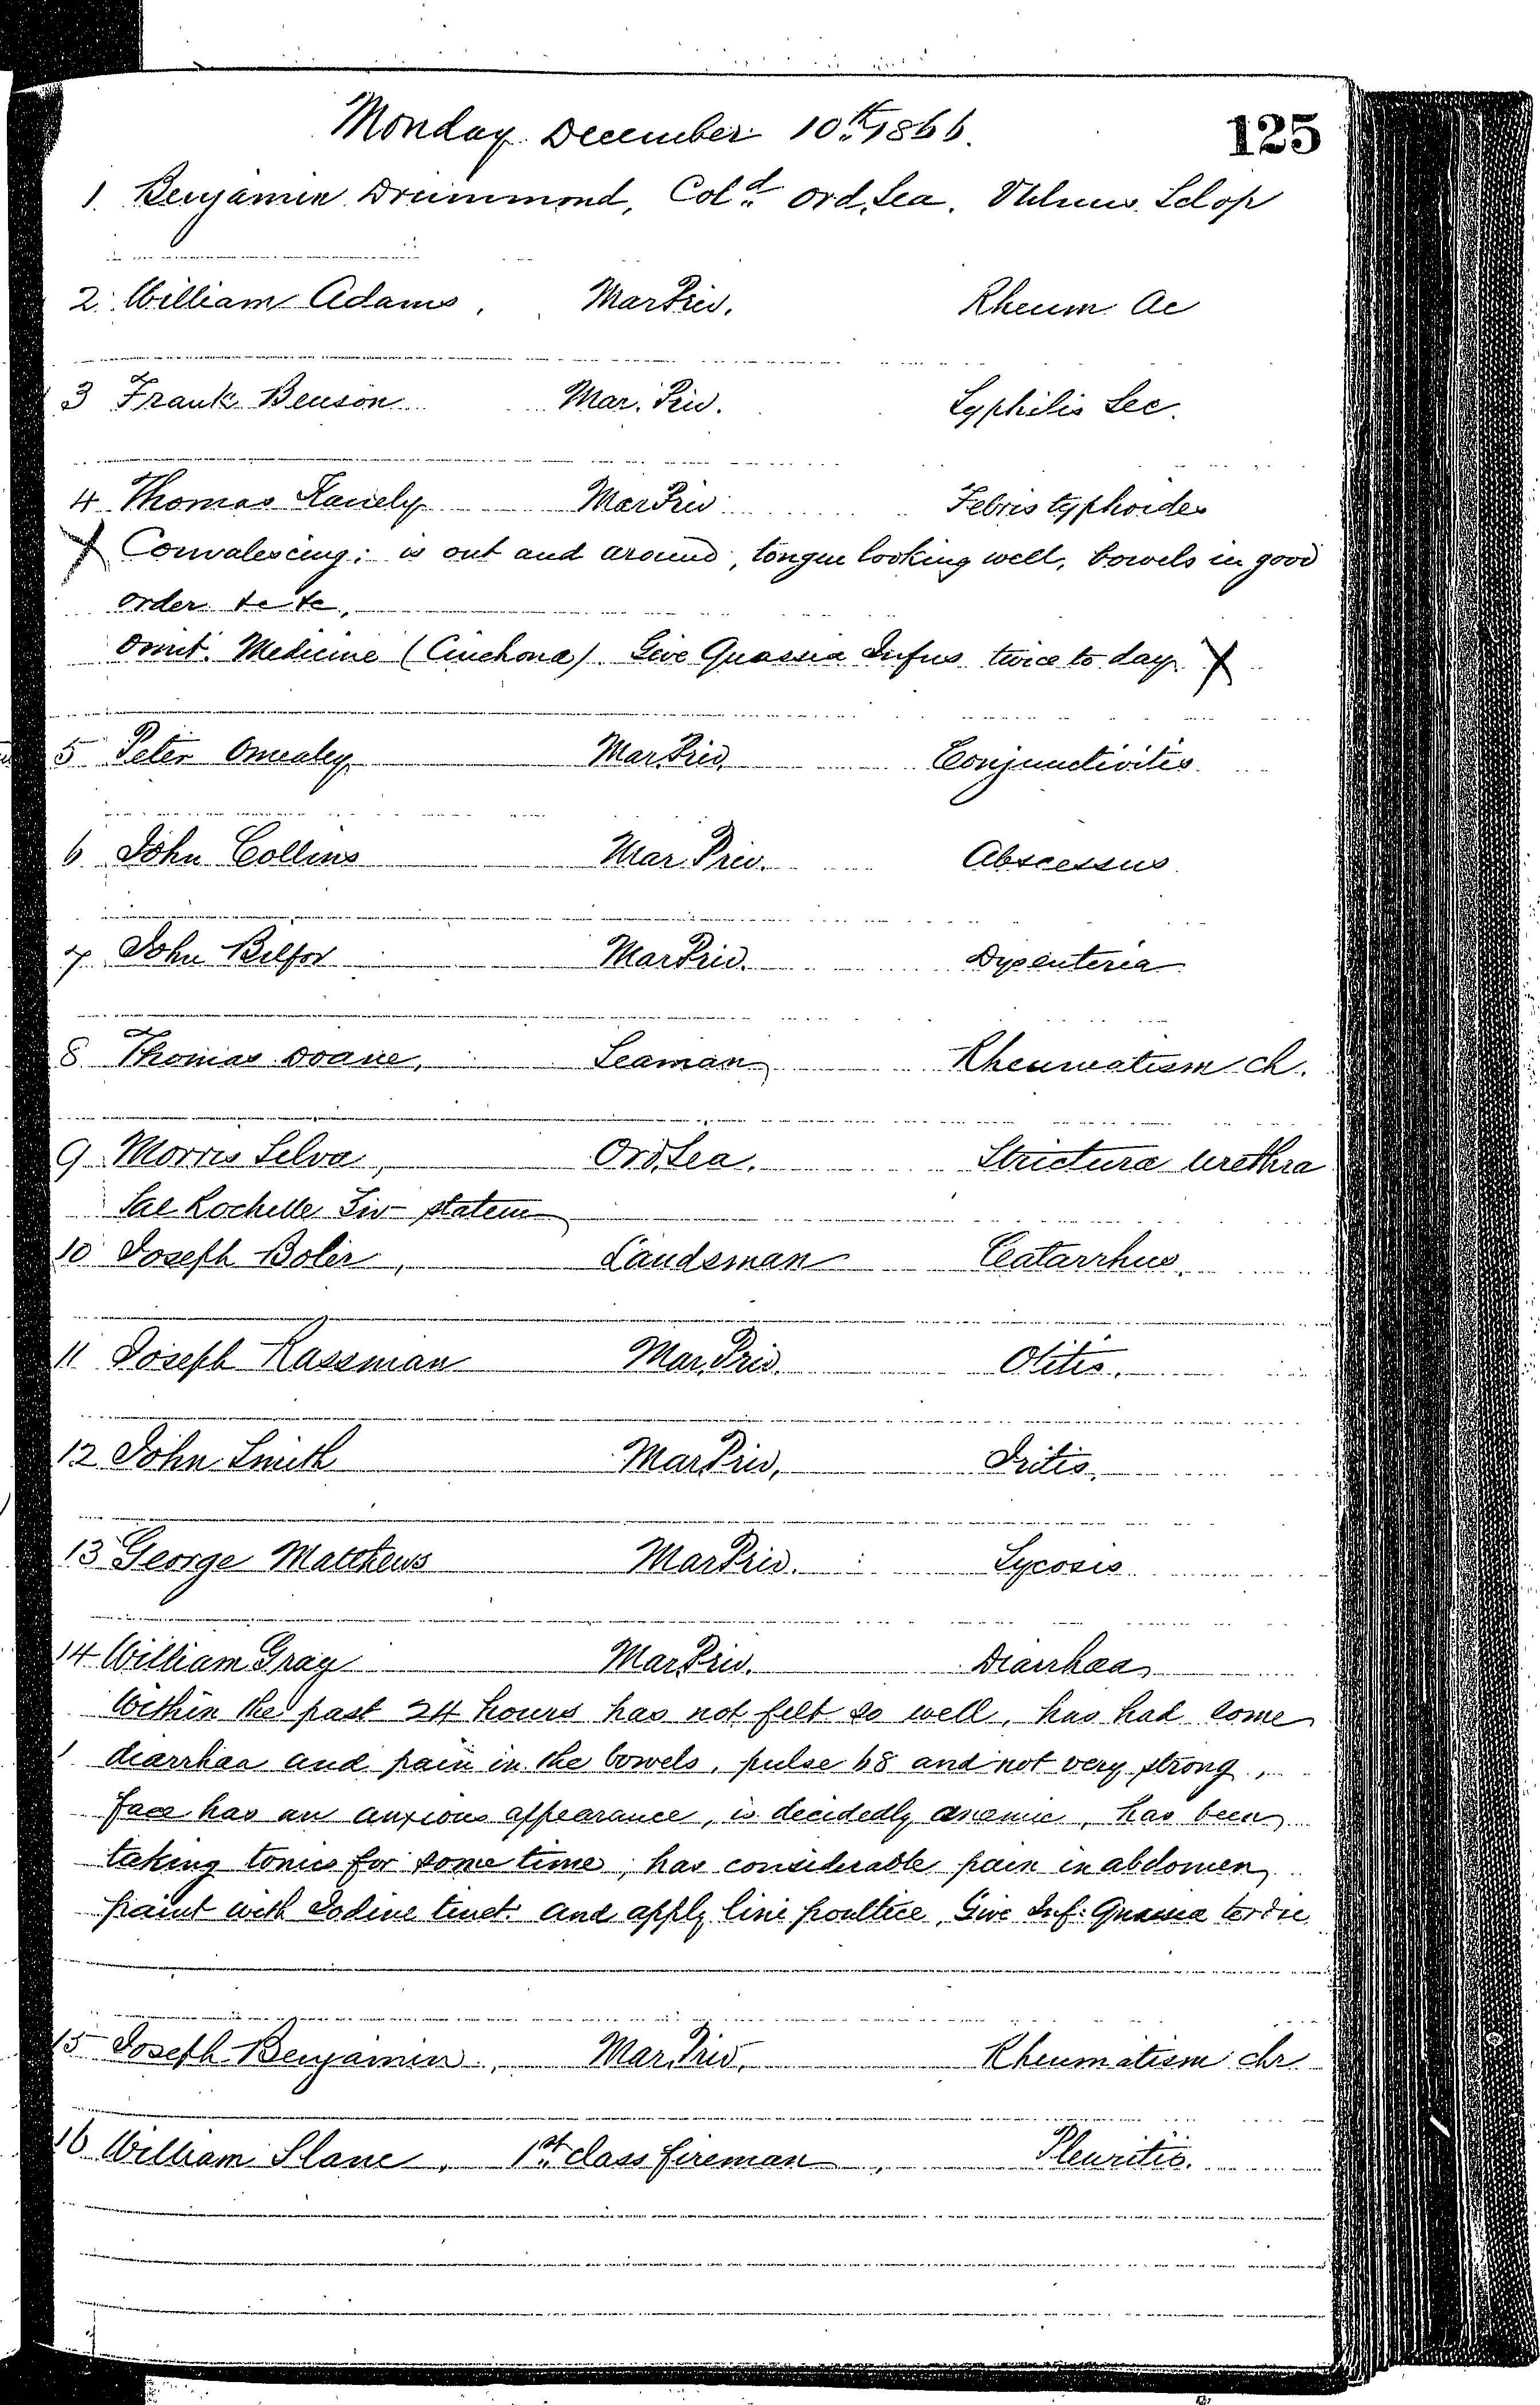 Patients in the Naval Hospital, Washington DC, on December 10, 1866, page 1 of 4, in the Medical Journal, October 1, 1866 to March 20, 1867